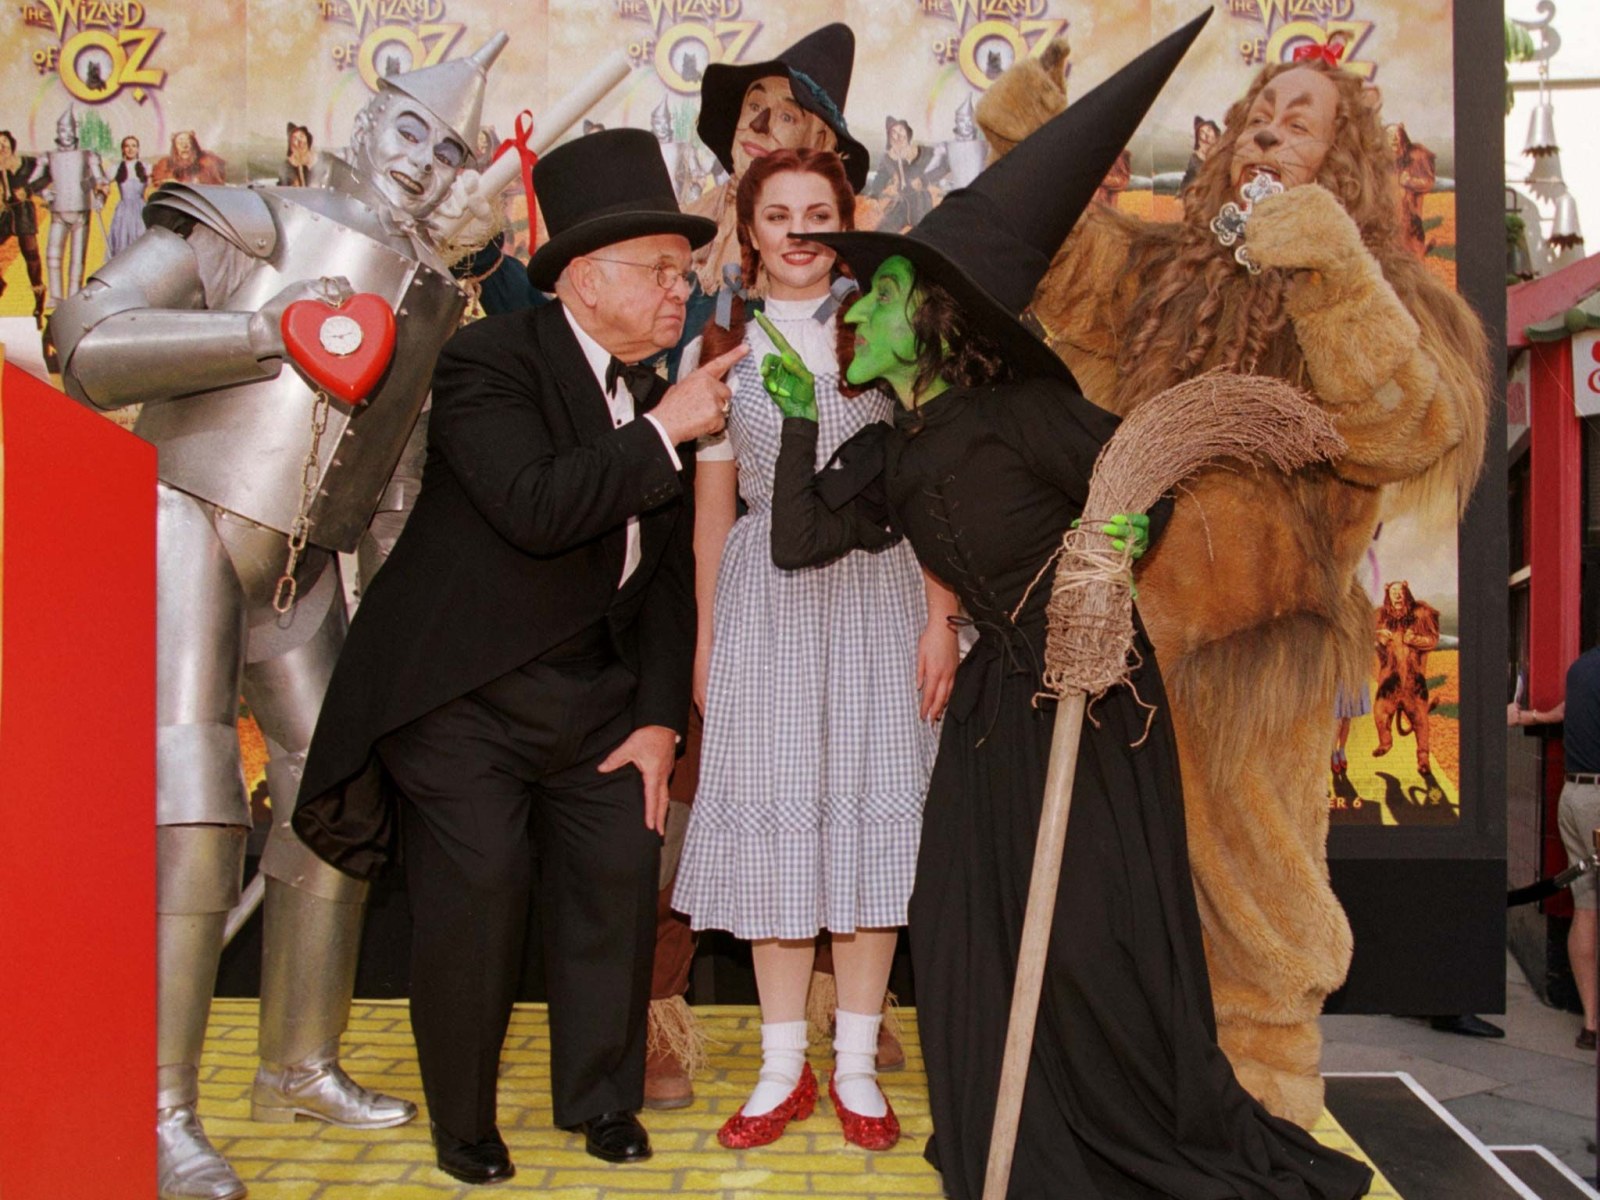 What Donald Trump Could Learn From the Wizard of Oz